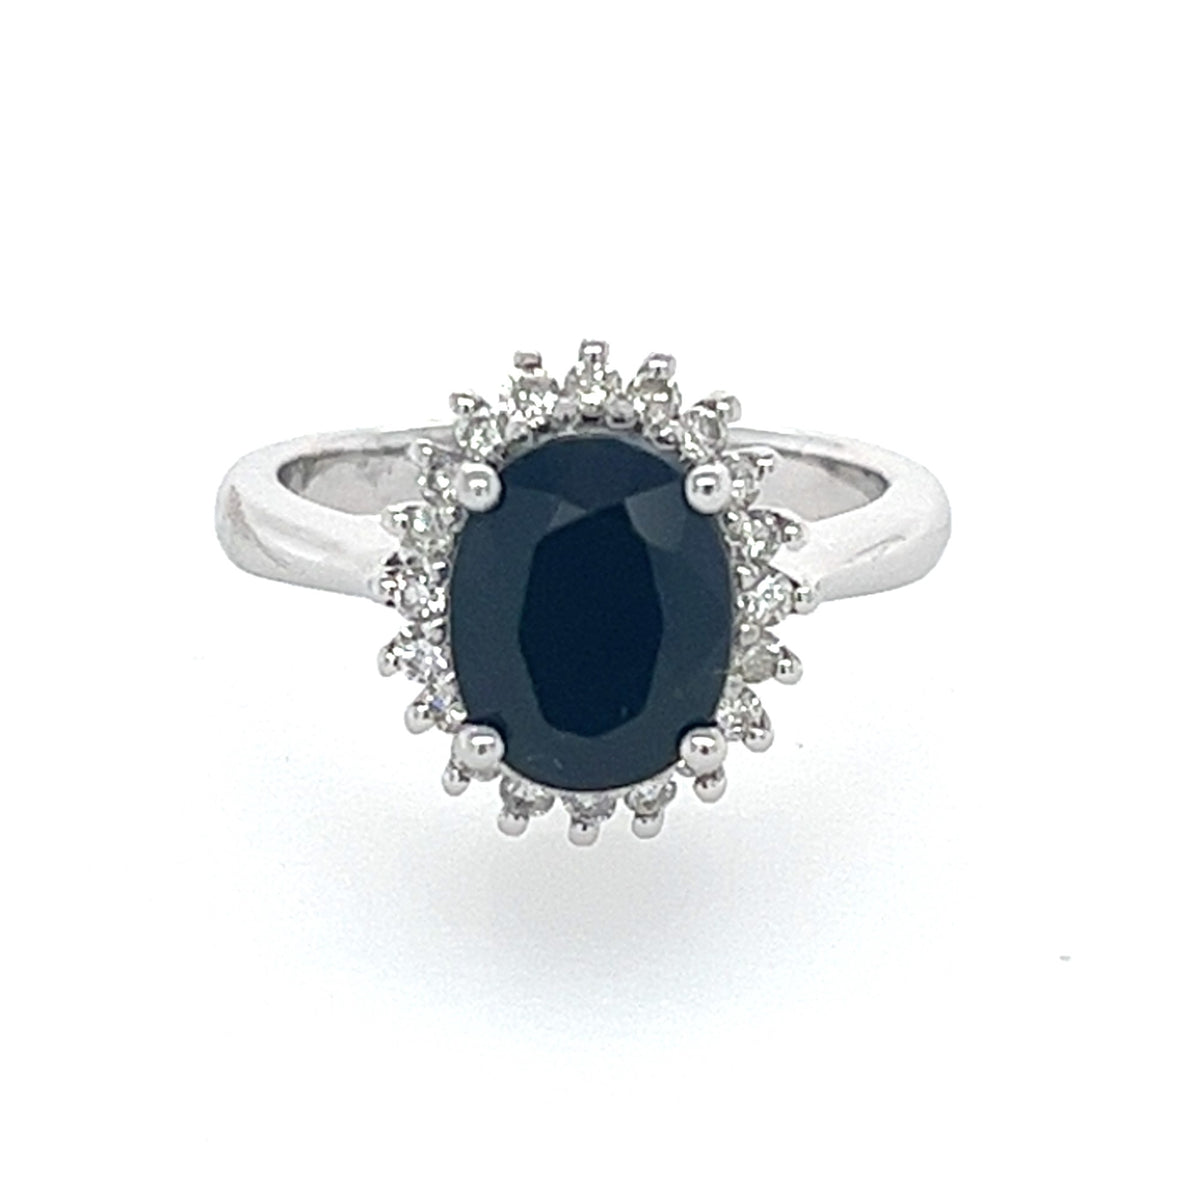 14KT WHITE GOLD DIAMOND AND SAPPHIRE CENTER LADIES RING